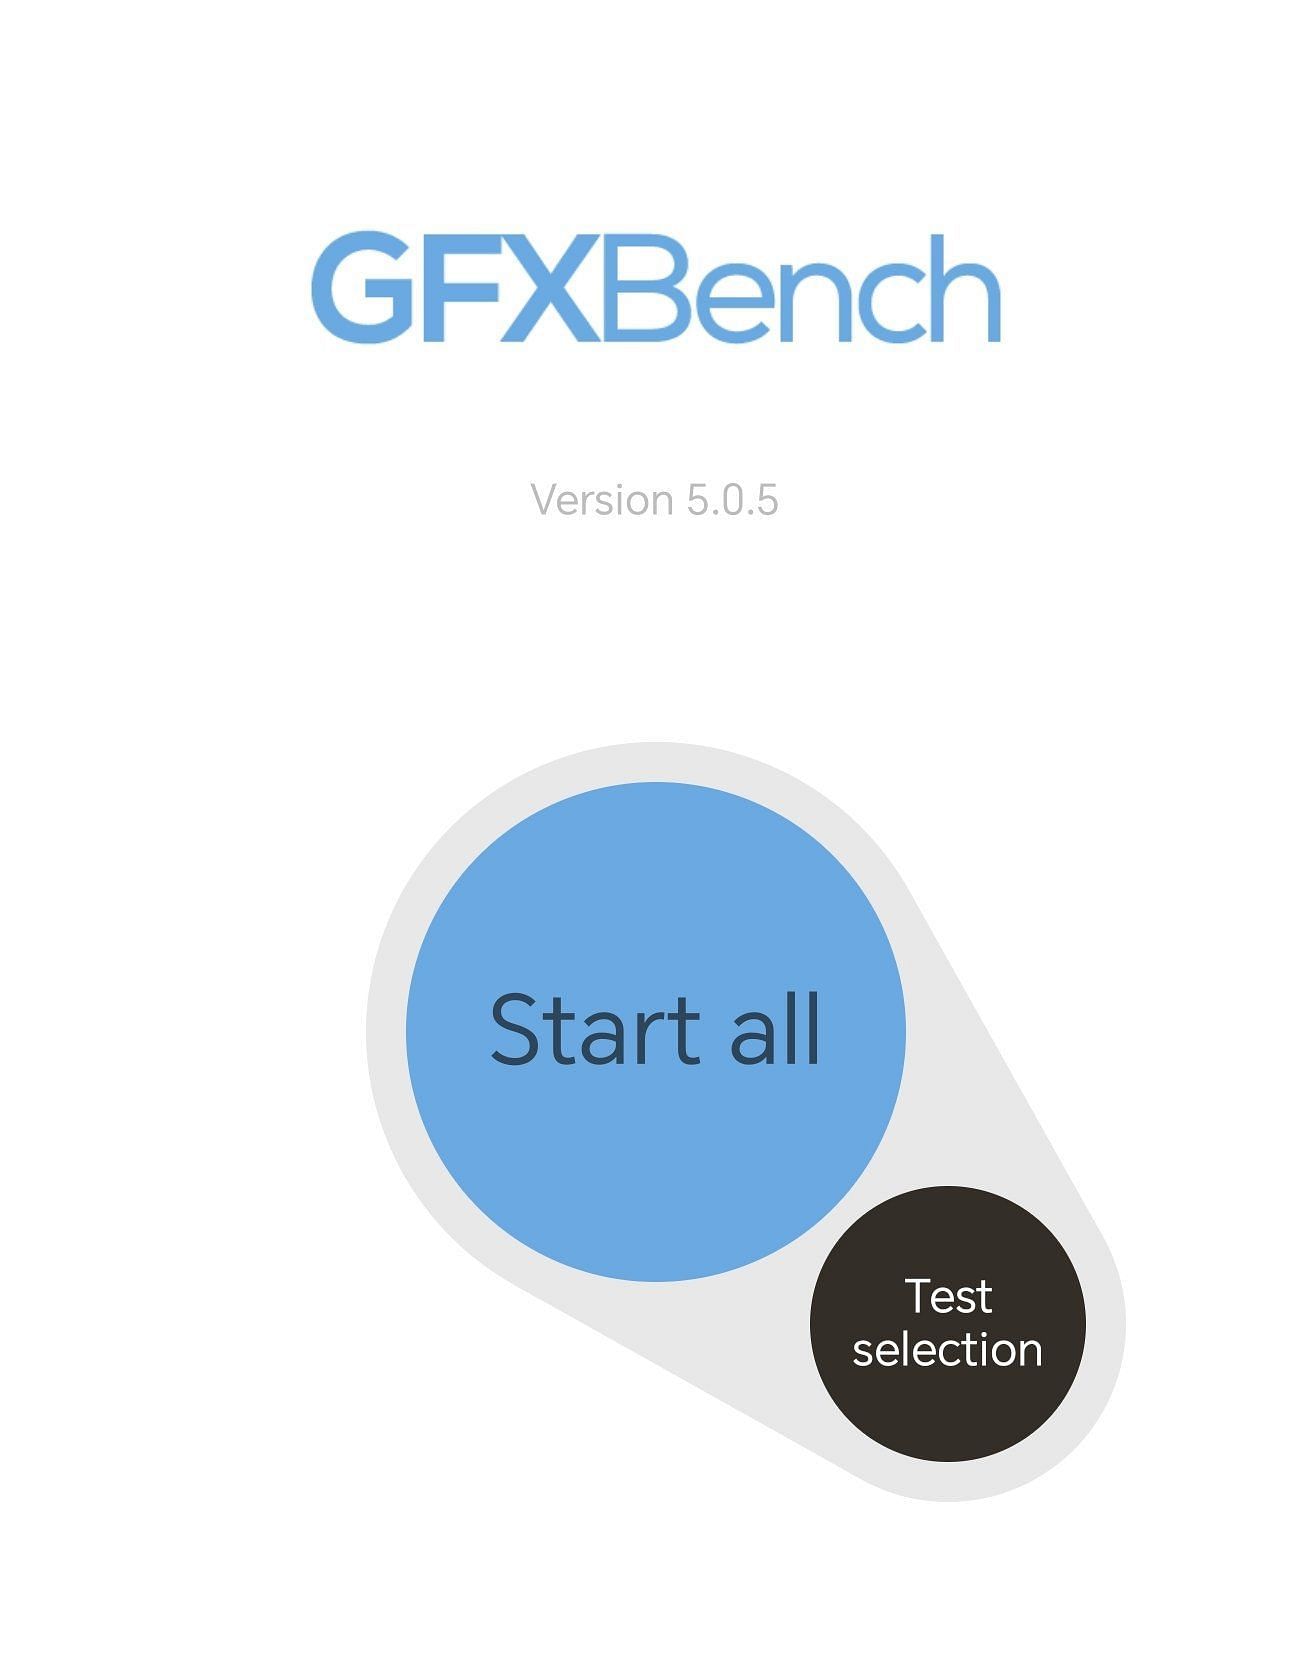 GFXbench is a graphics-focused benchmark app (Image via GFXBench)